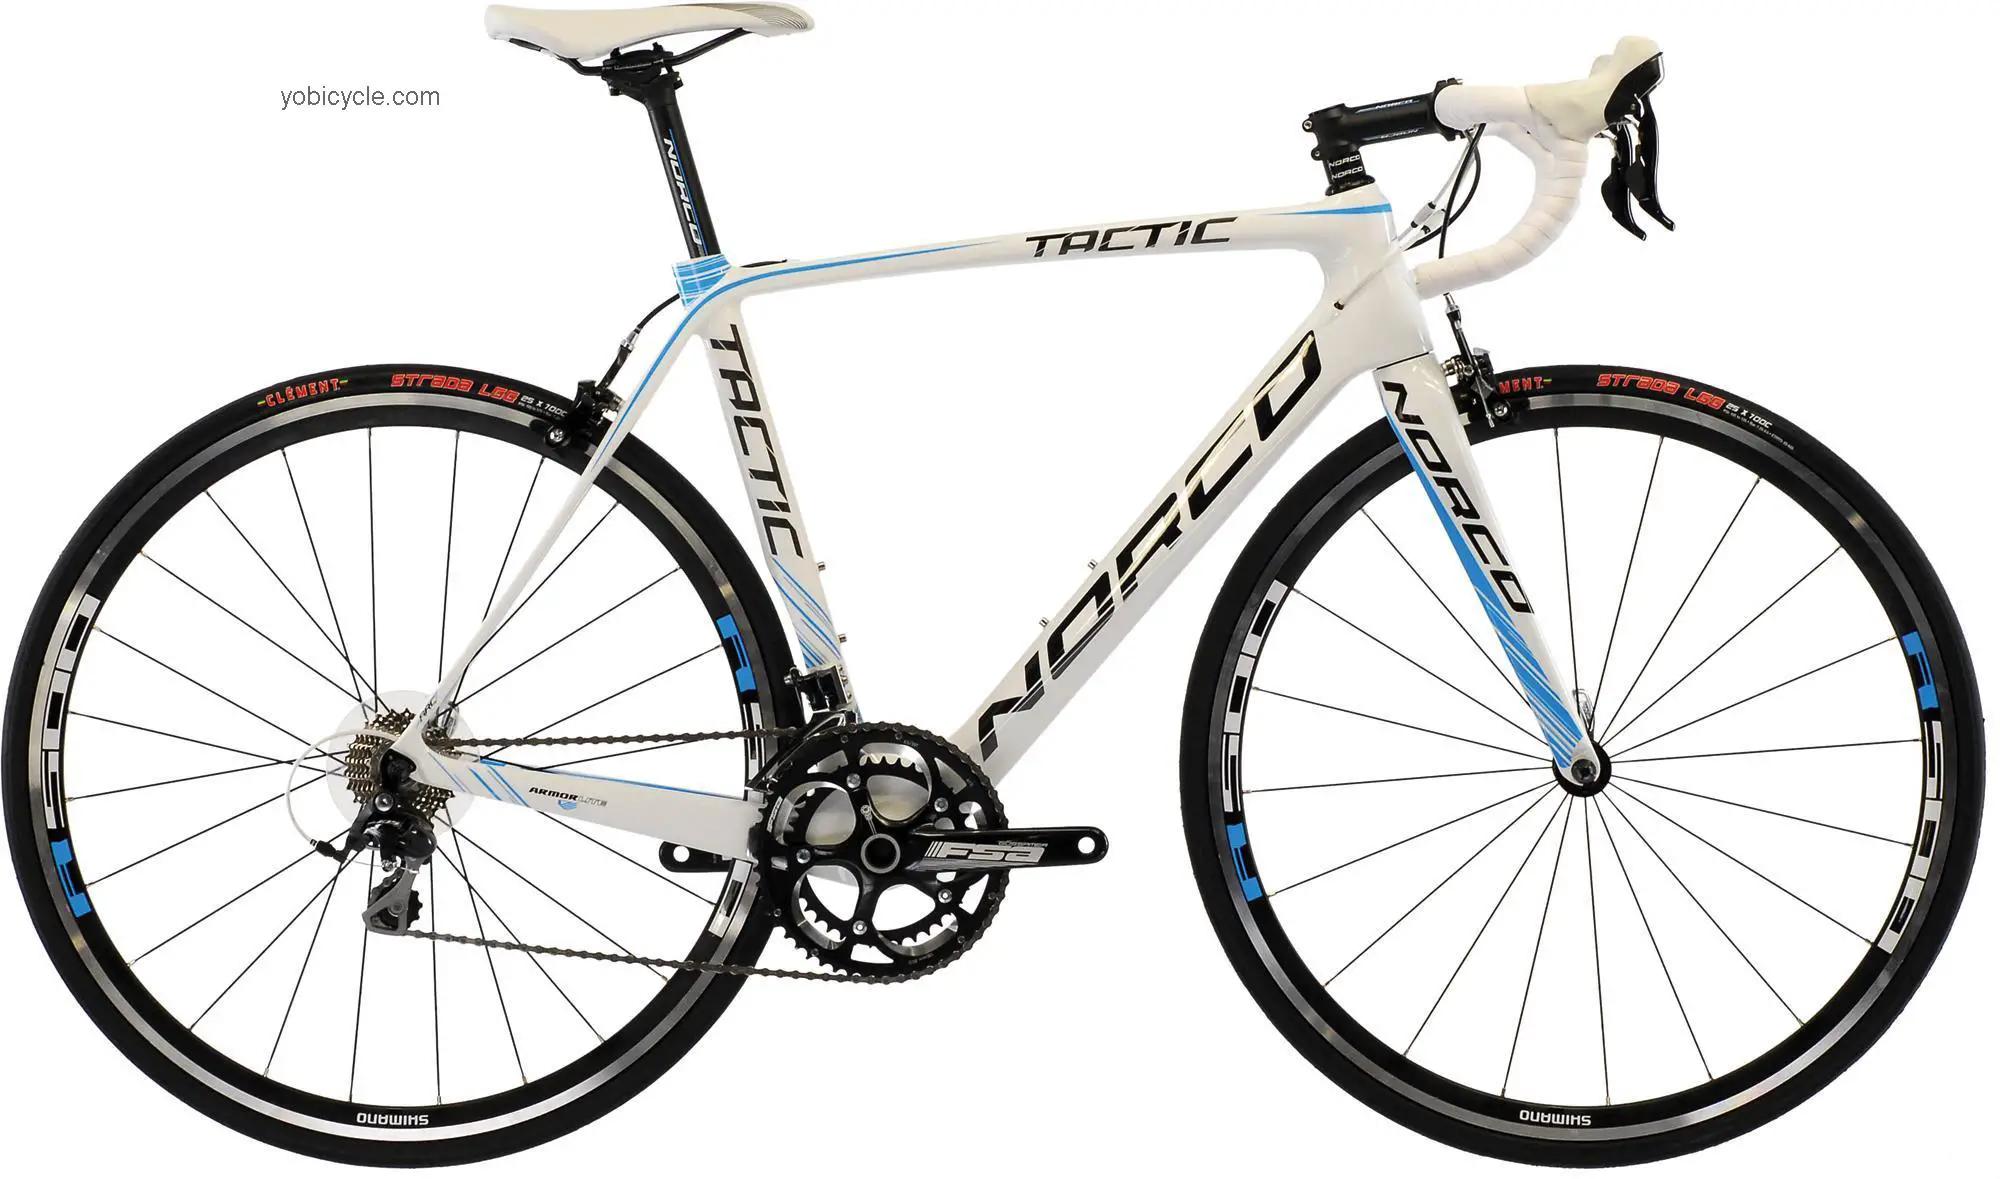 Norco Tactic 3 2013 comparison online with competitors